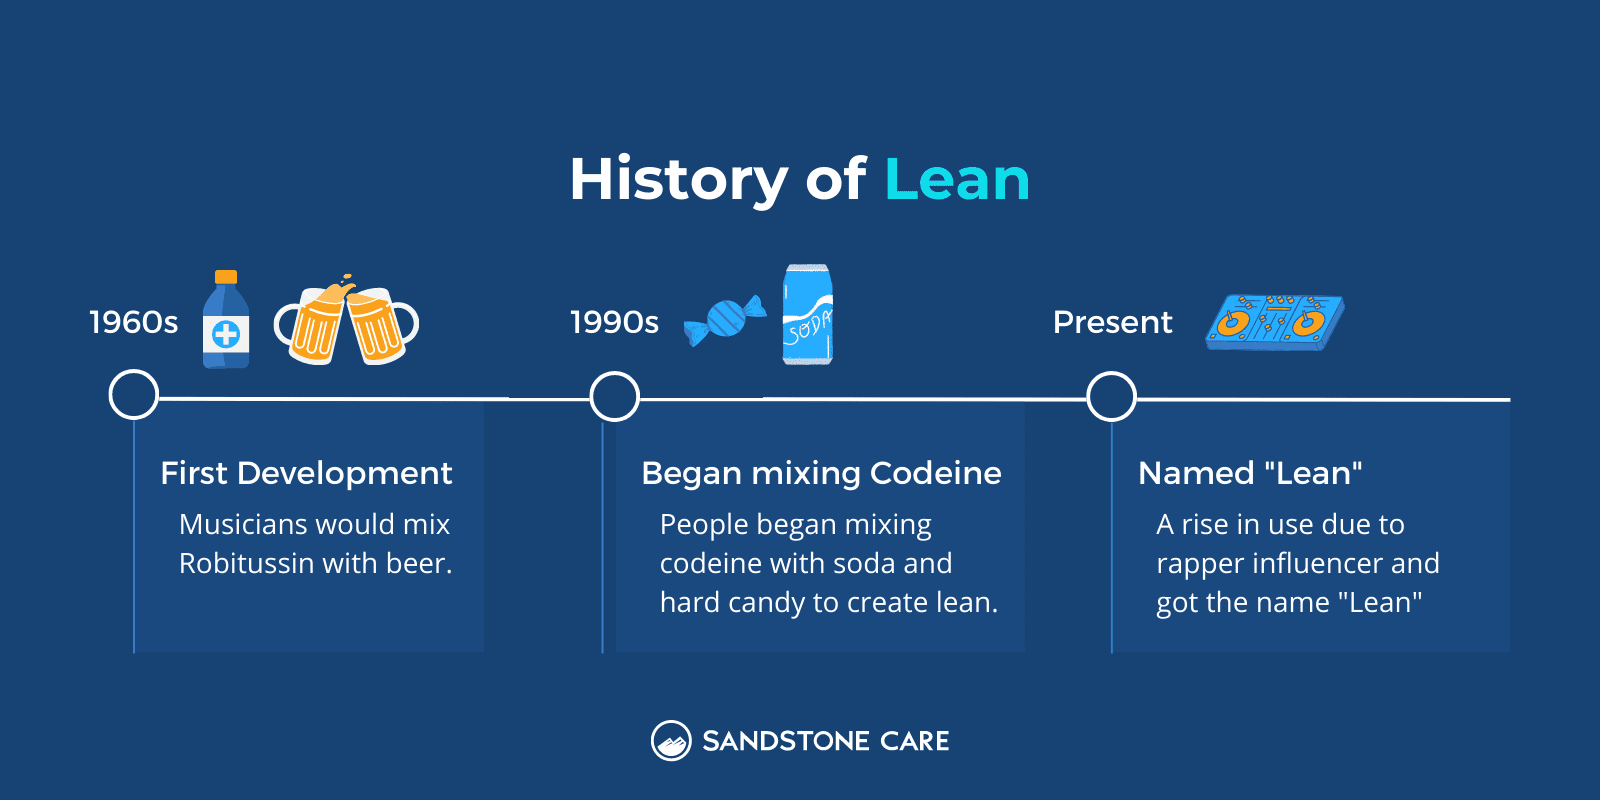 "History Of Lean" title above the timeline of lean history with texts and relevant illustrations